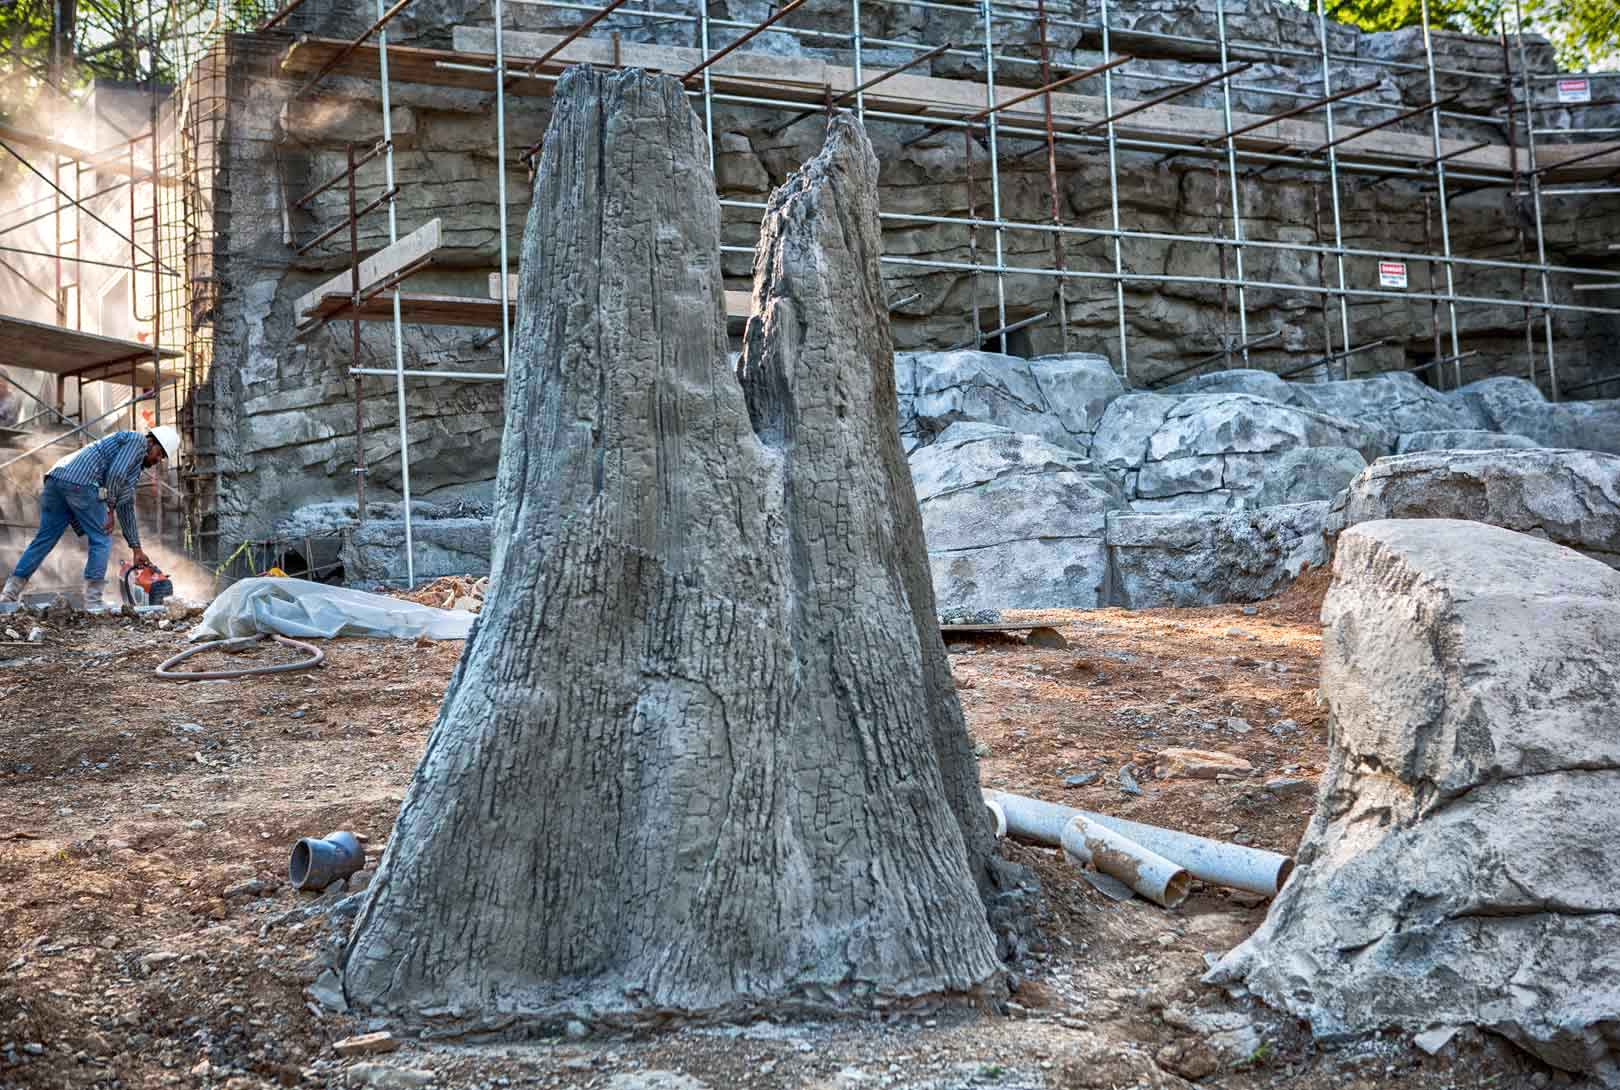 concrete fabricated tree stump with other rock boulder formations under construction